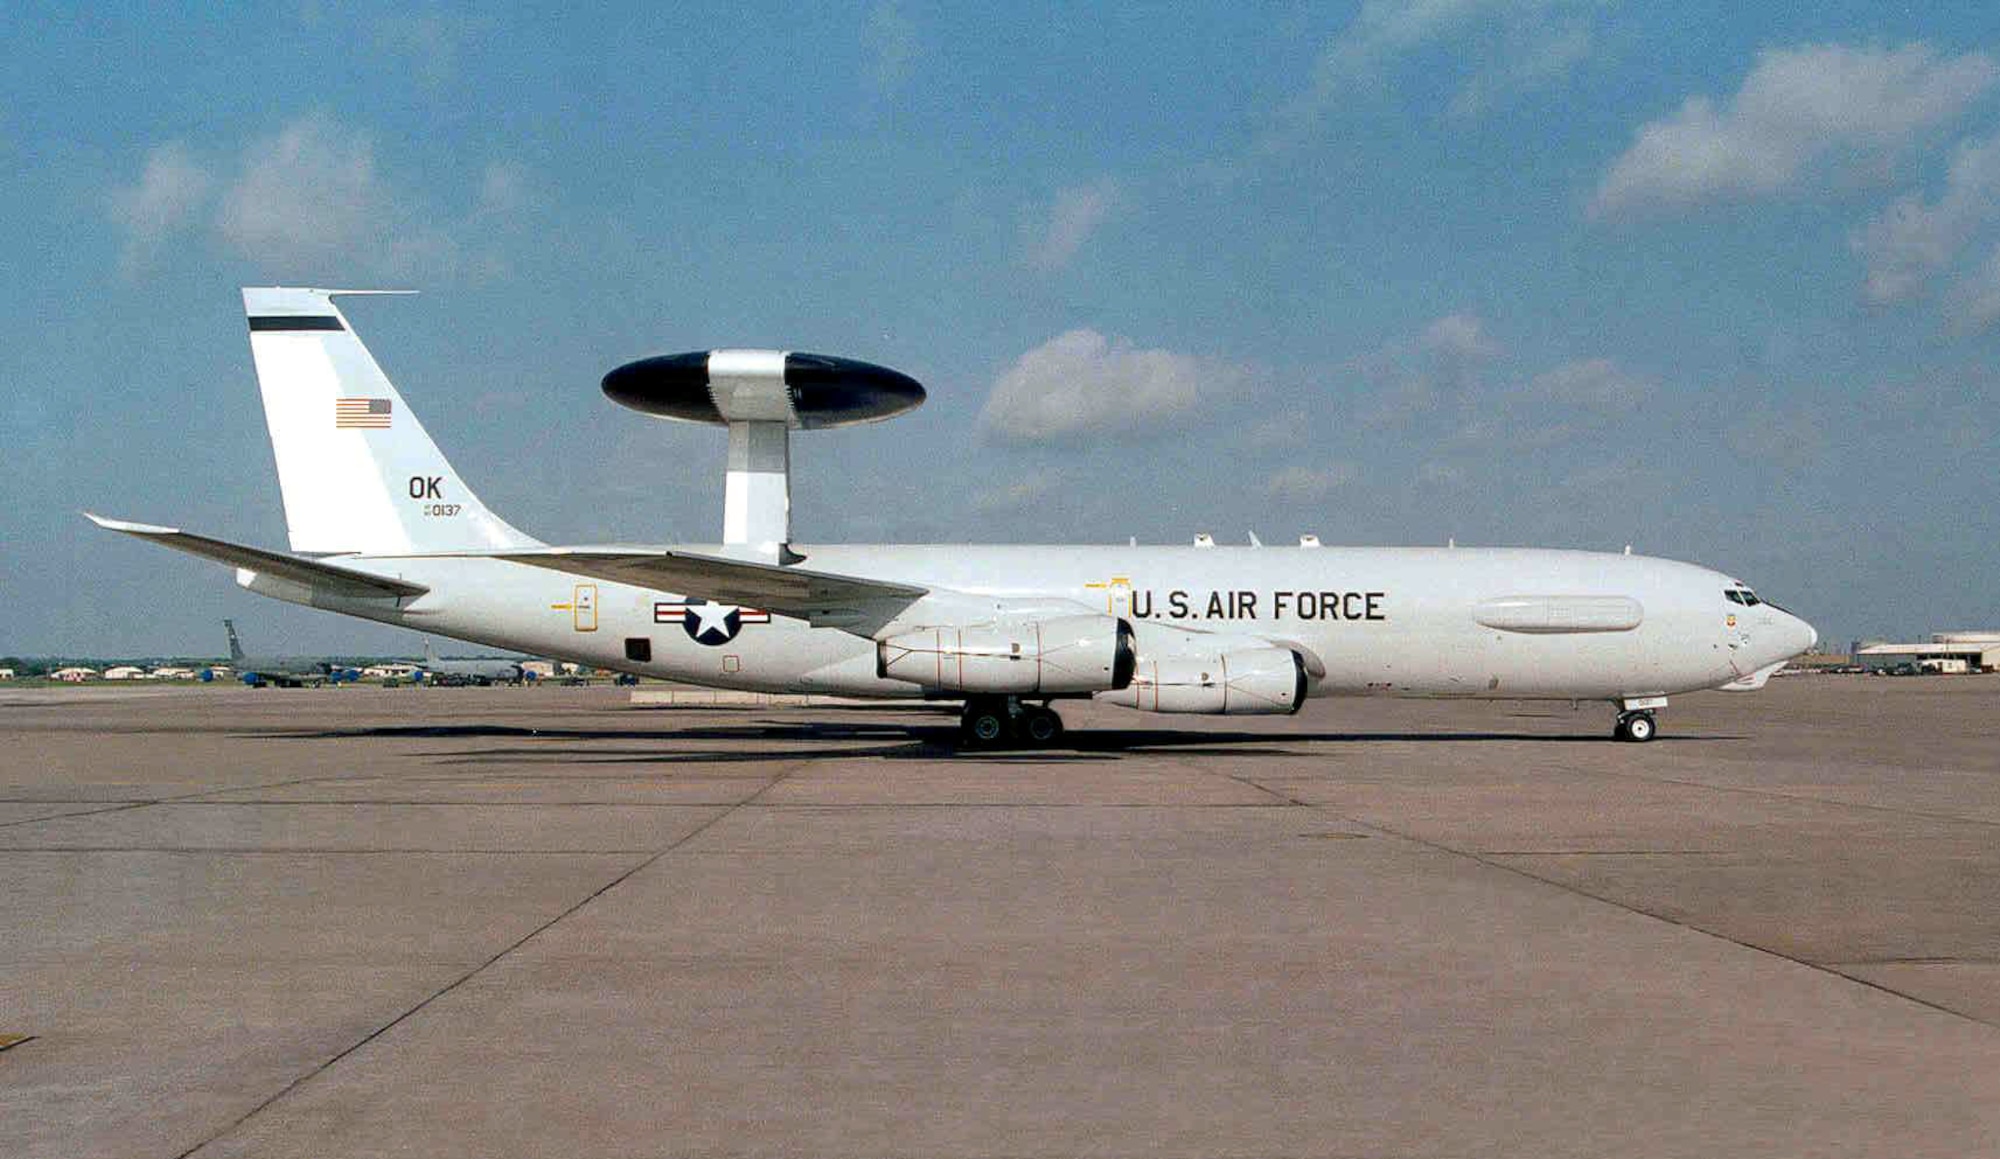 FILE PHOTO -- The E-3 Sentry is a modified Boeing 707/320 commercial airframe with a rotating radar dome. The dome is 30 feet in diameter, 6 feet thick and is held 11 feet above the fuselage by two struts. It contains a radar subsystem that permits surveillance from the Earth's surface up into the stratosphere, over land or water. The radar has a range of more than 200 miles for low-flying targets and farther for aerospace vehicles flying at medium to high altitudes. (Courtesy photo)